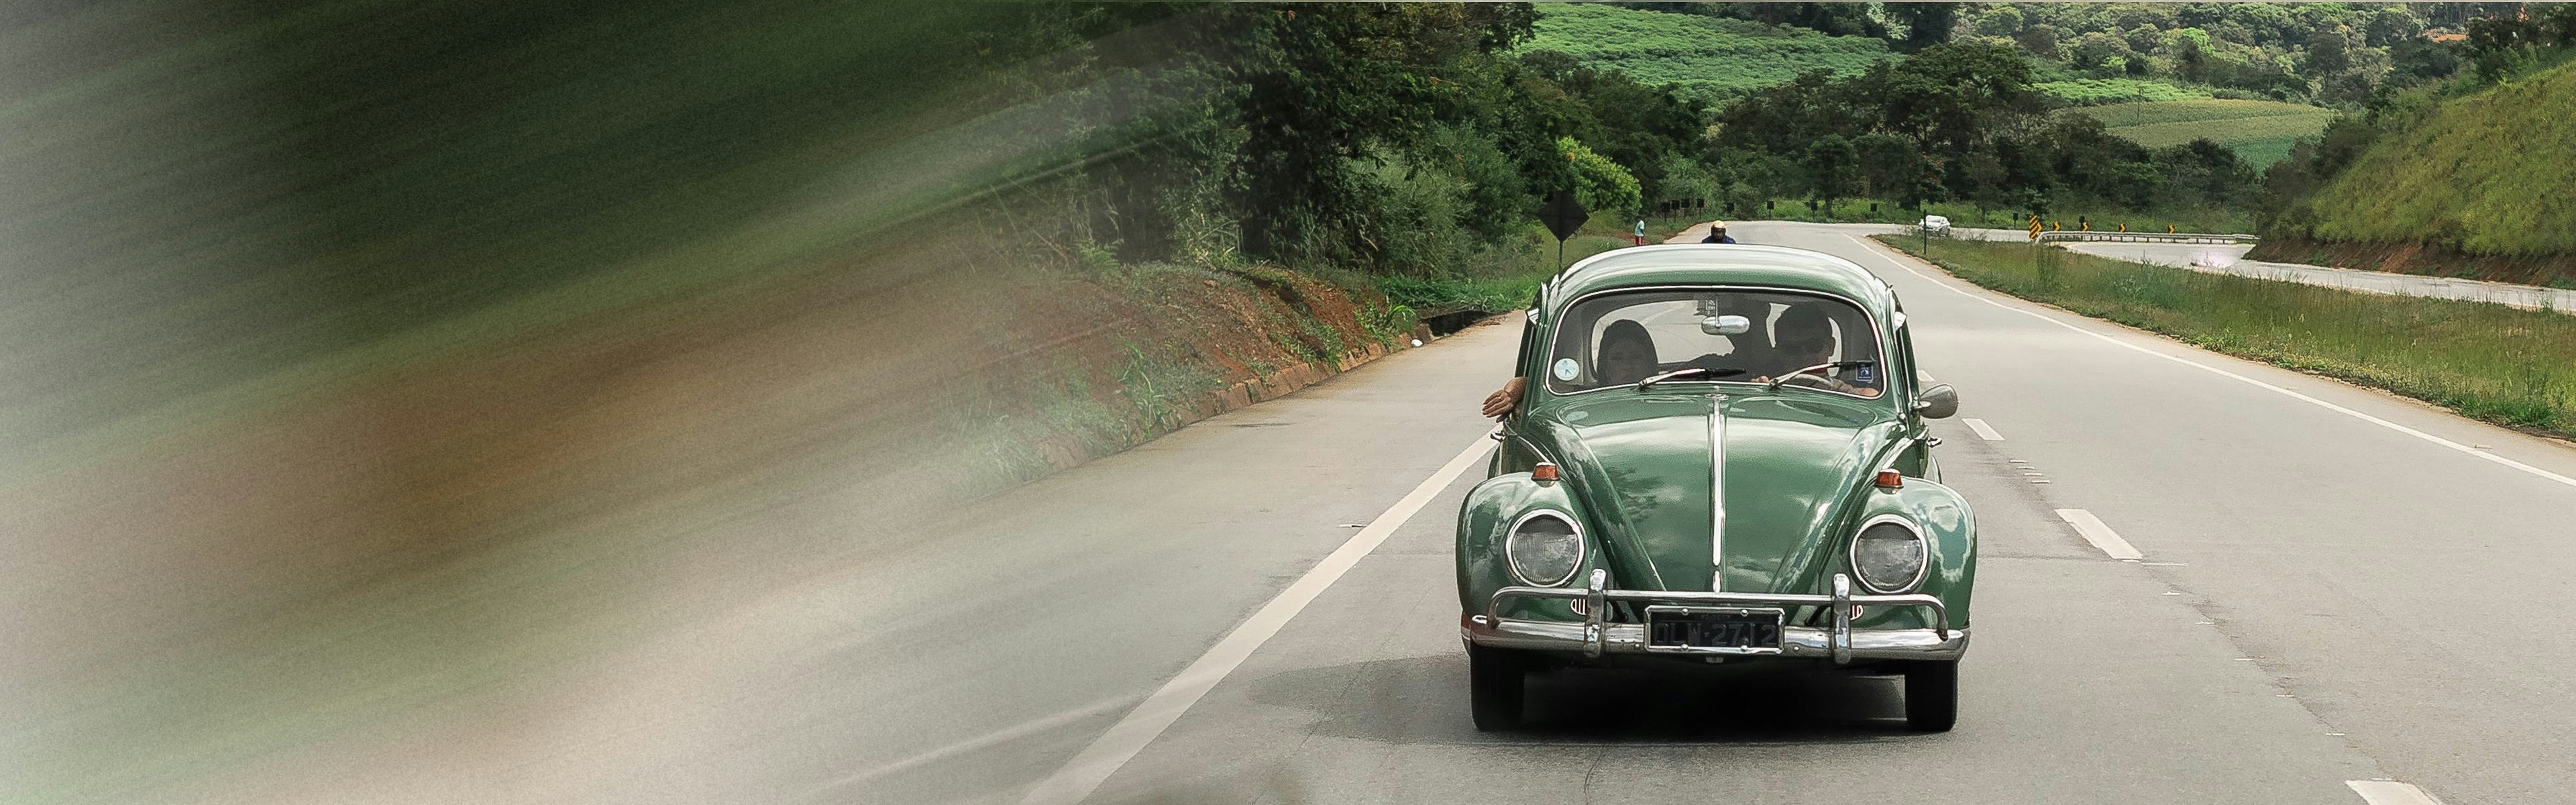 Couple in classic green Volkswagen car driving down a highway with forest in background